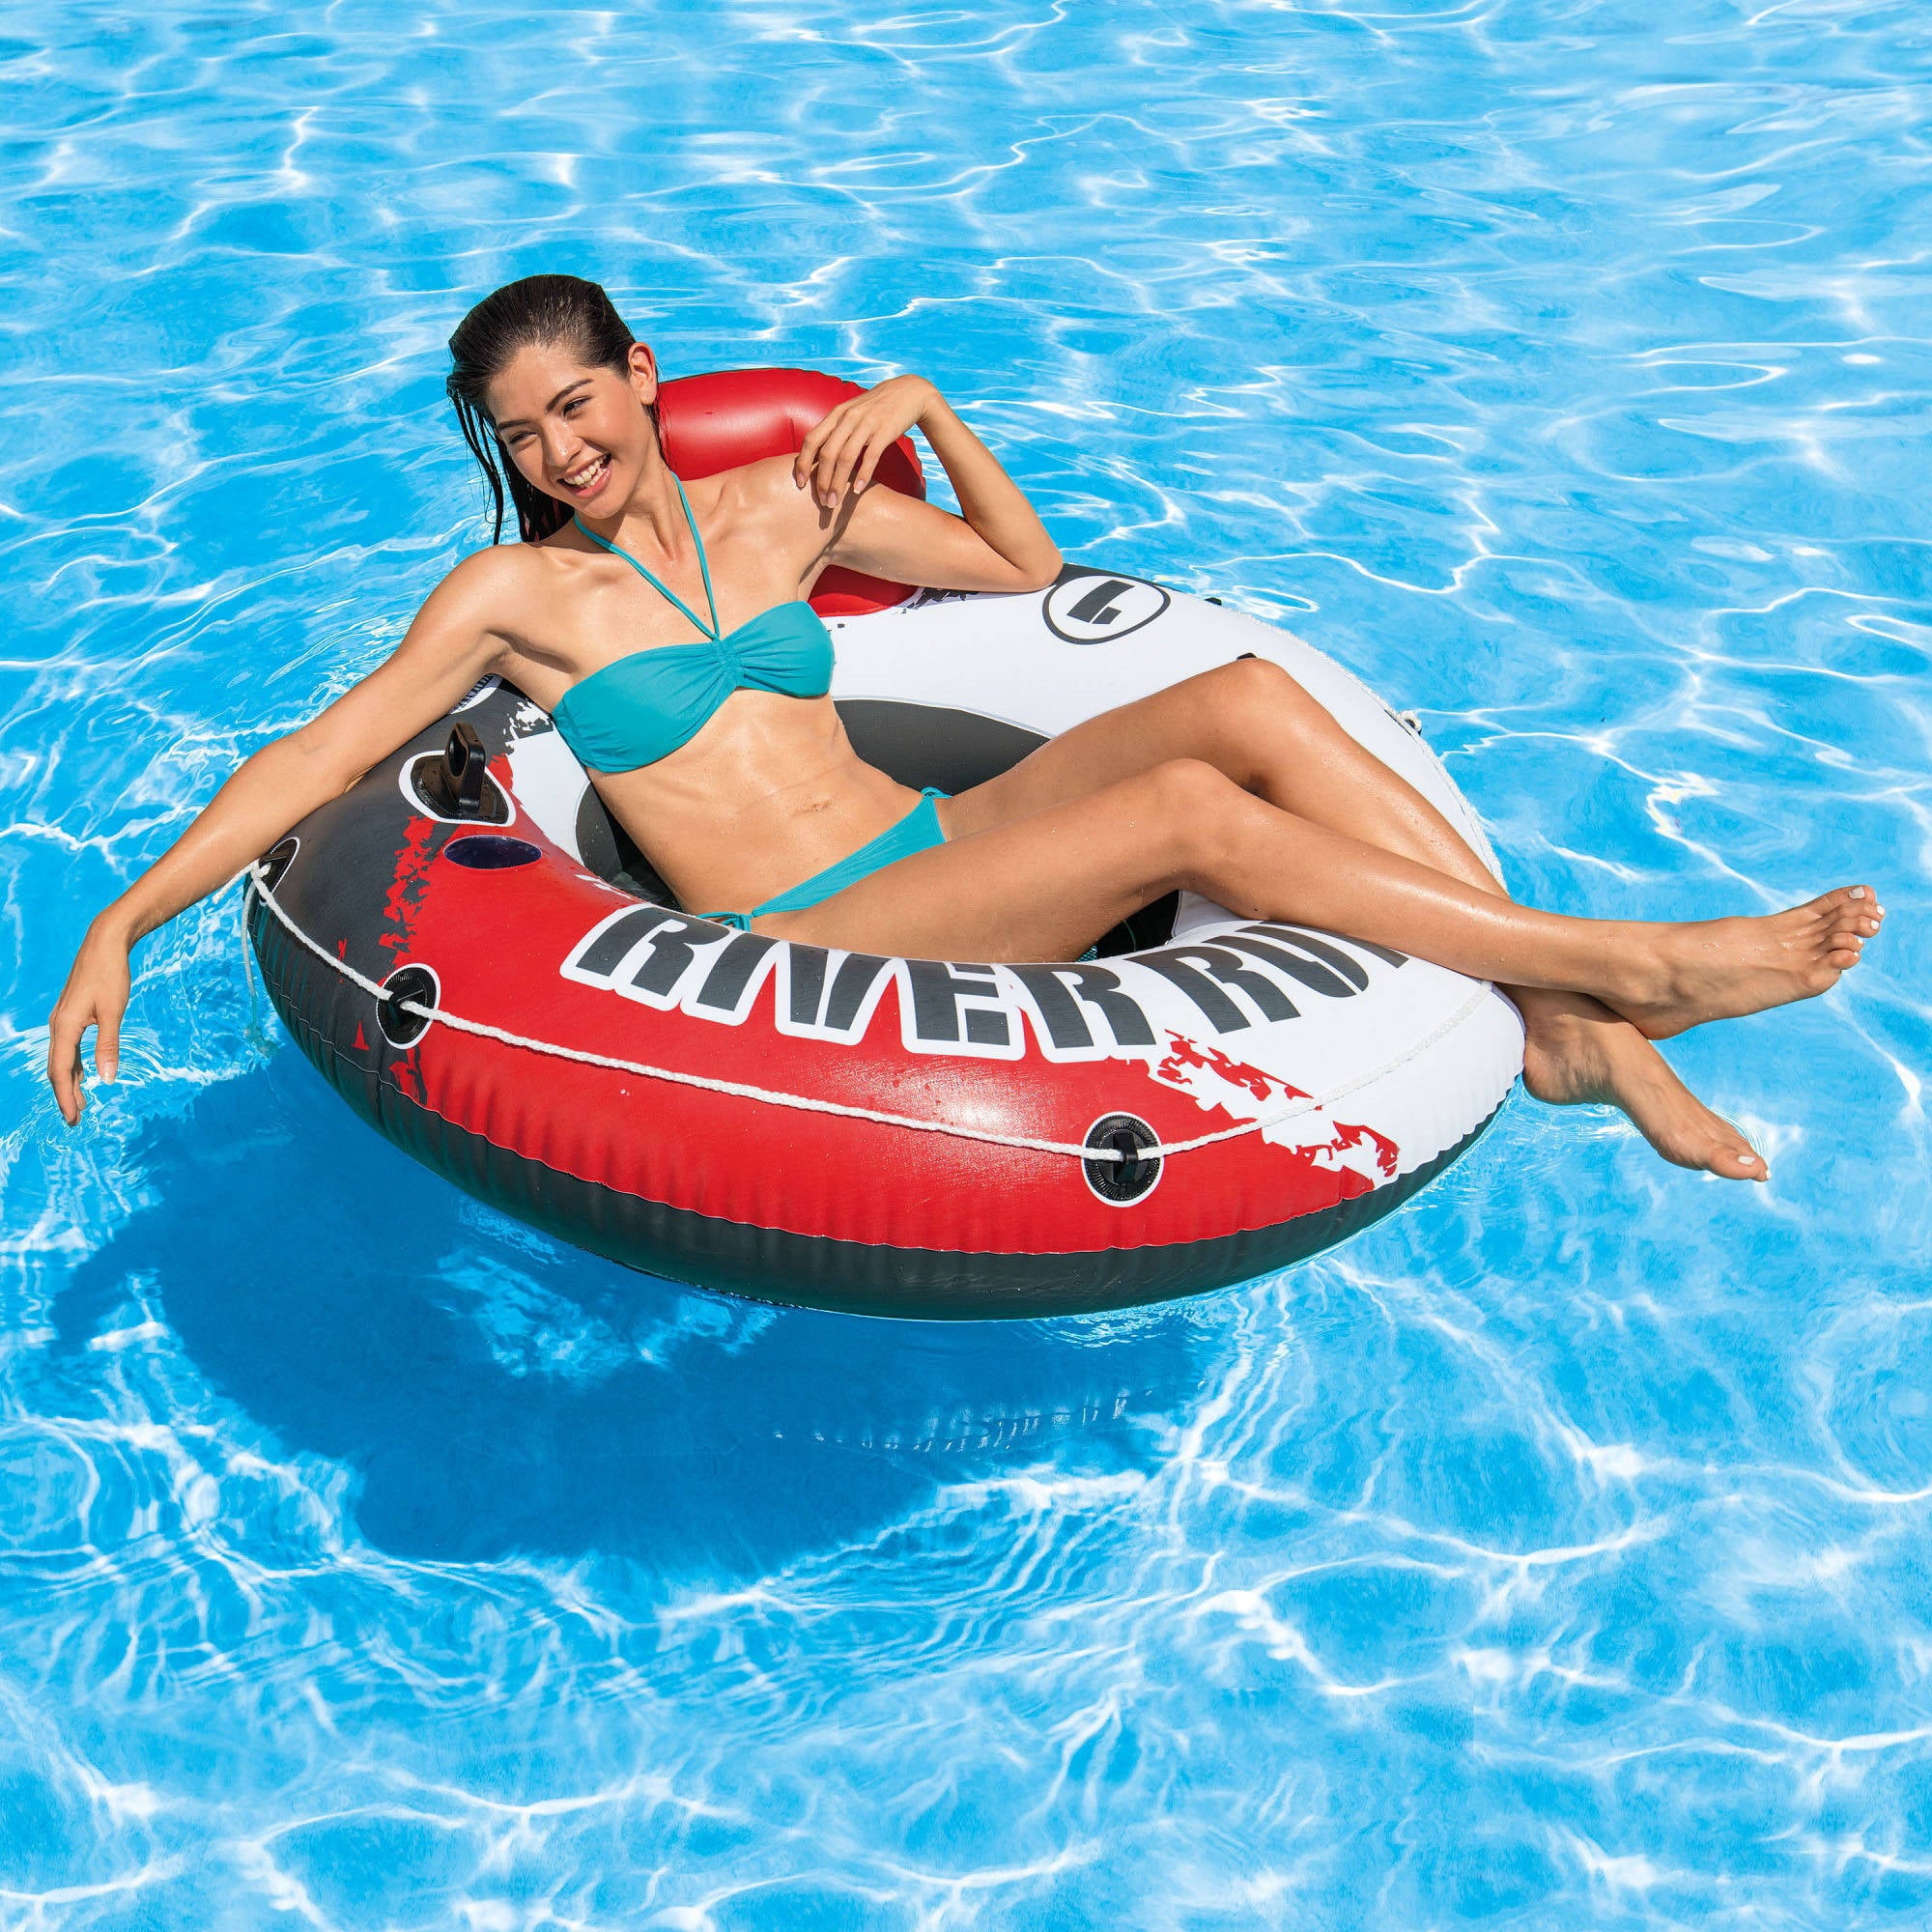 Intex Adult Round Inflatable Red River Run I Lake, River and  Pool Tube